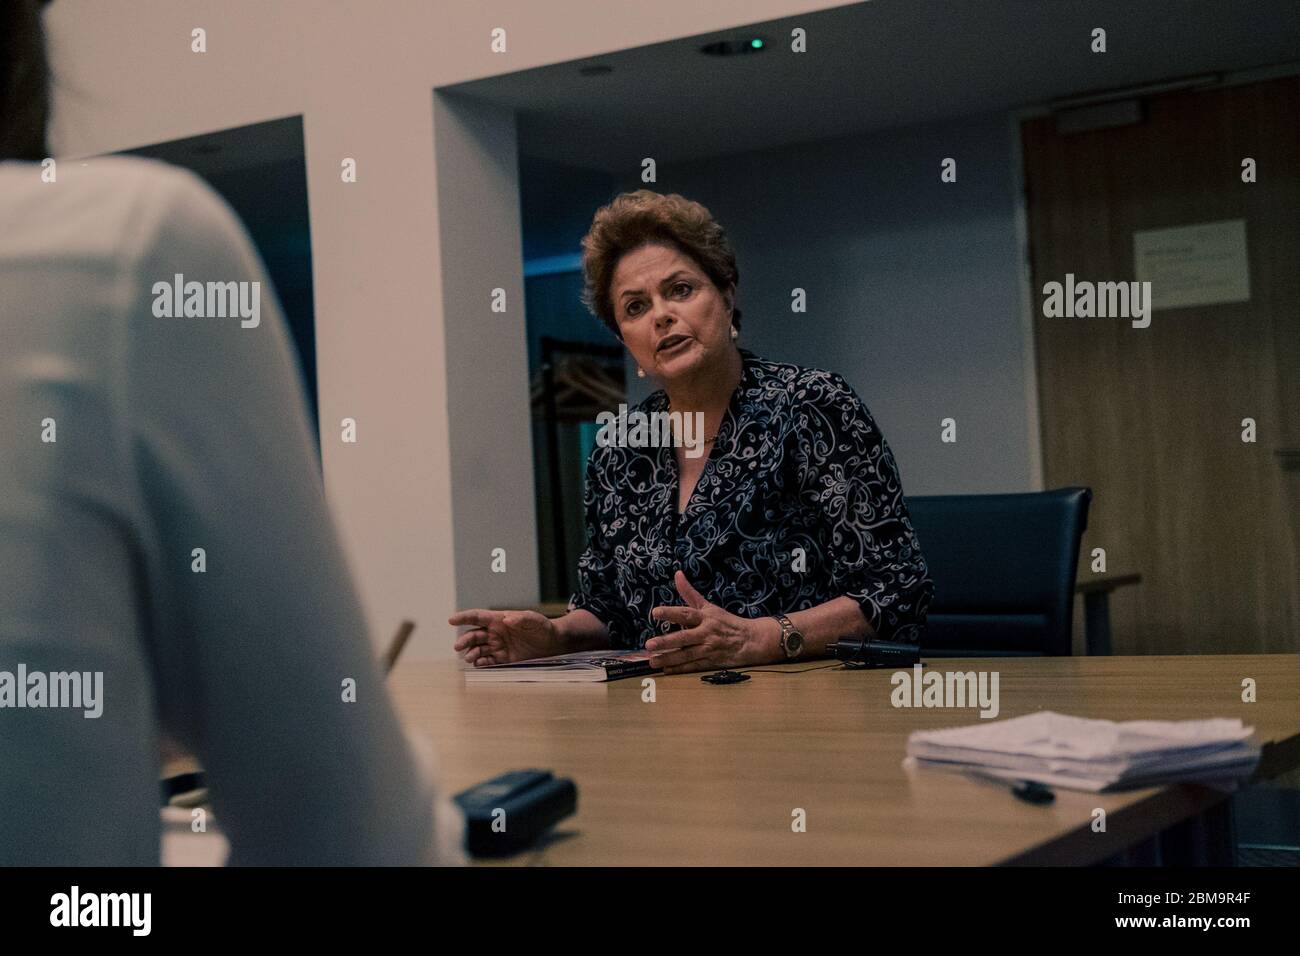 Former President of Brazil Dilma Rousseff during an interview in London, UK. Stock Photo